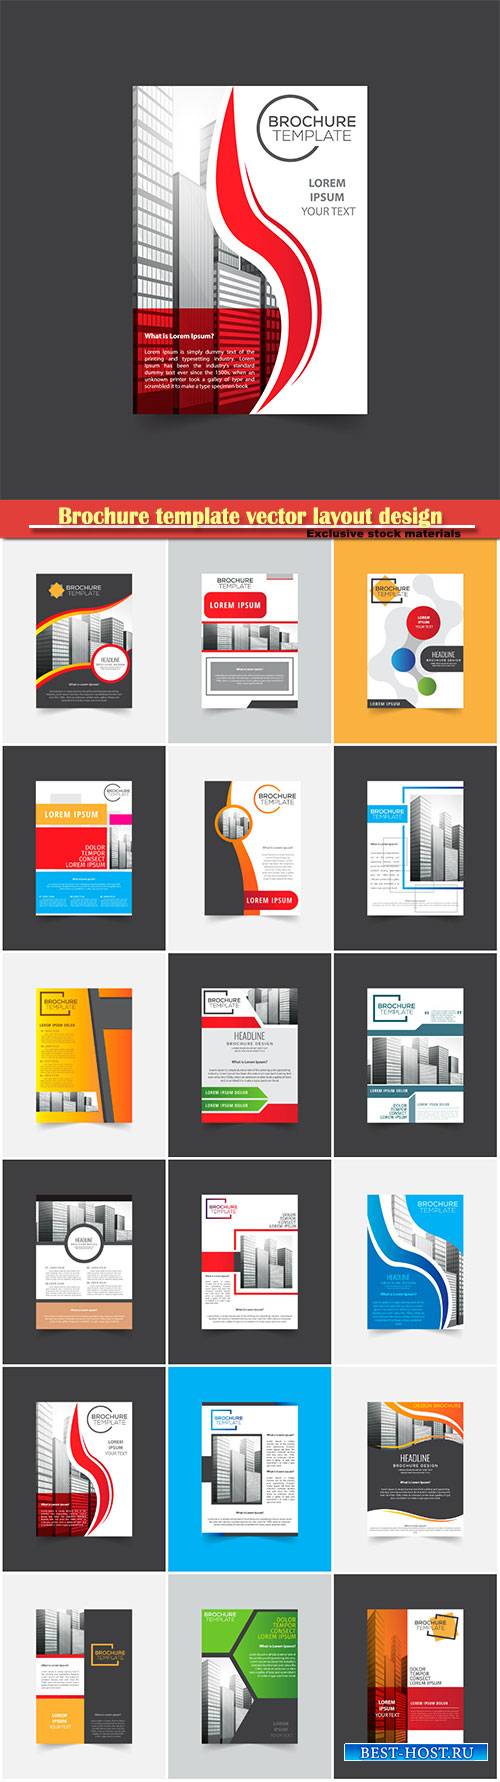 Brochure template vector layout design, corporate business annual report, magazine, flyer mockup # 111